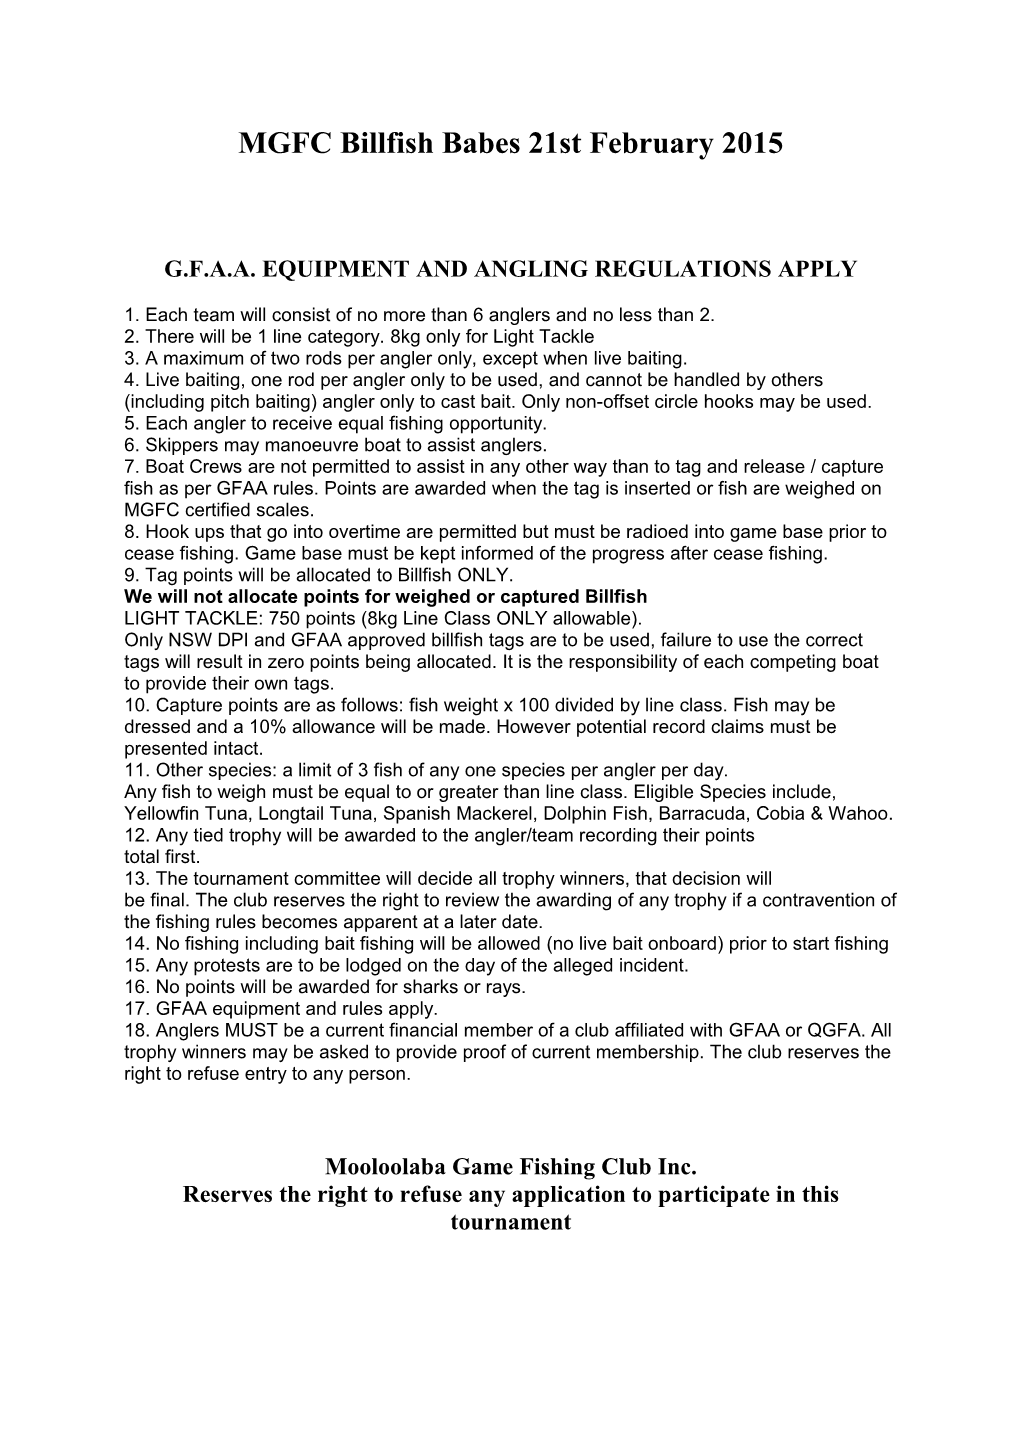 G.F.A.A. Equipment and Angling Regulations Apply